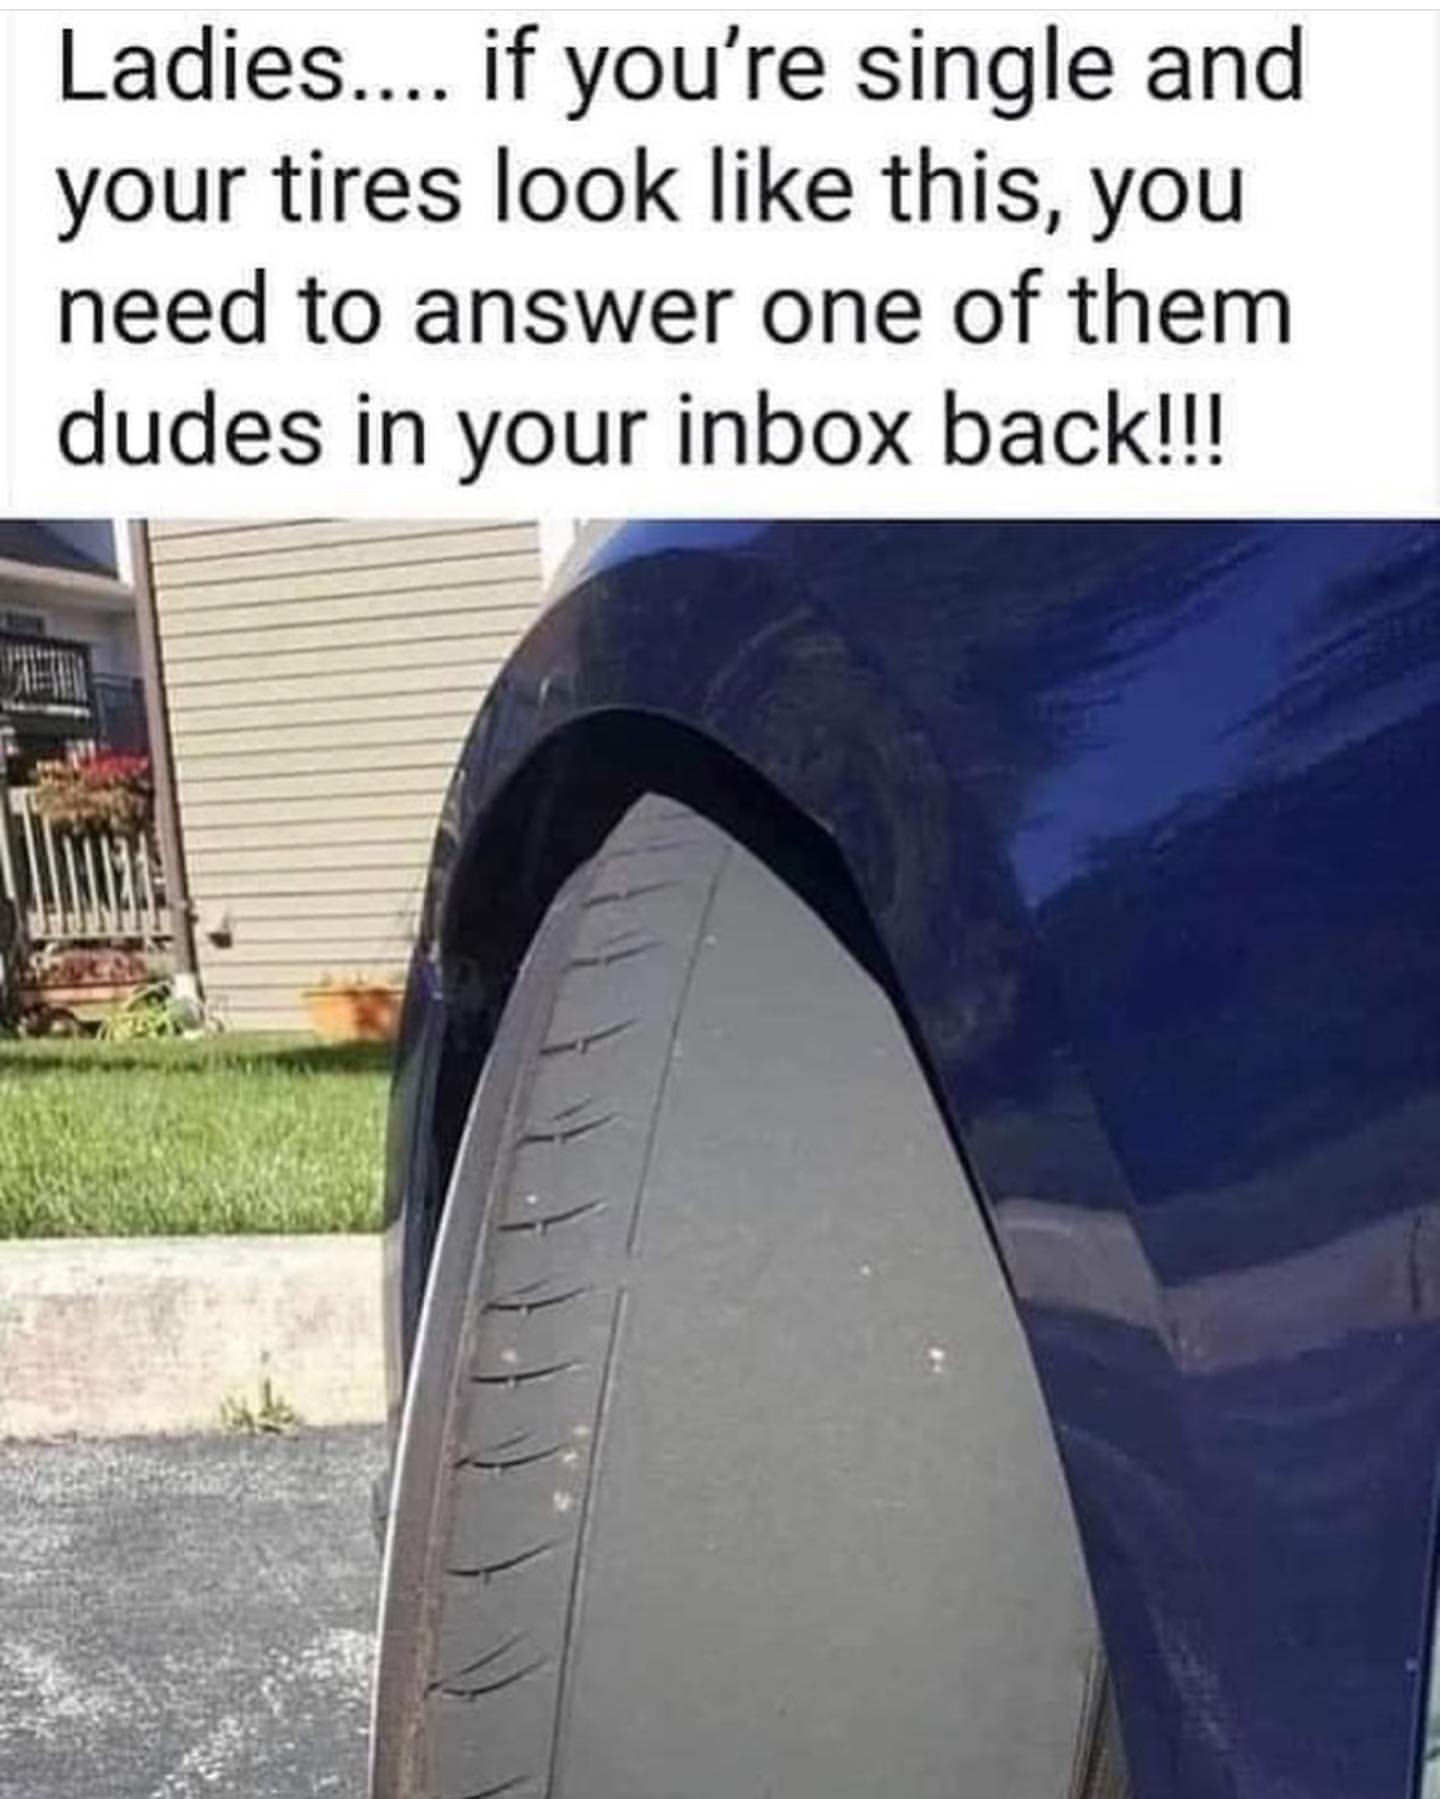 Ladies.... if you're single and your tires look like this, you need to answer one of them dudes in your inbox back!!!